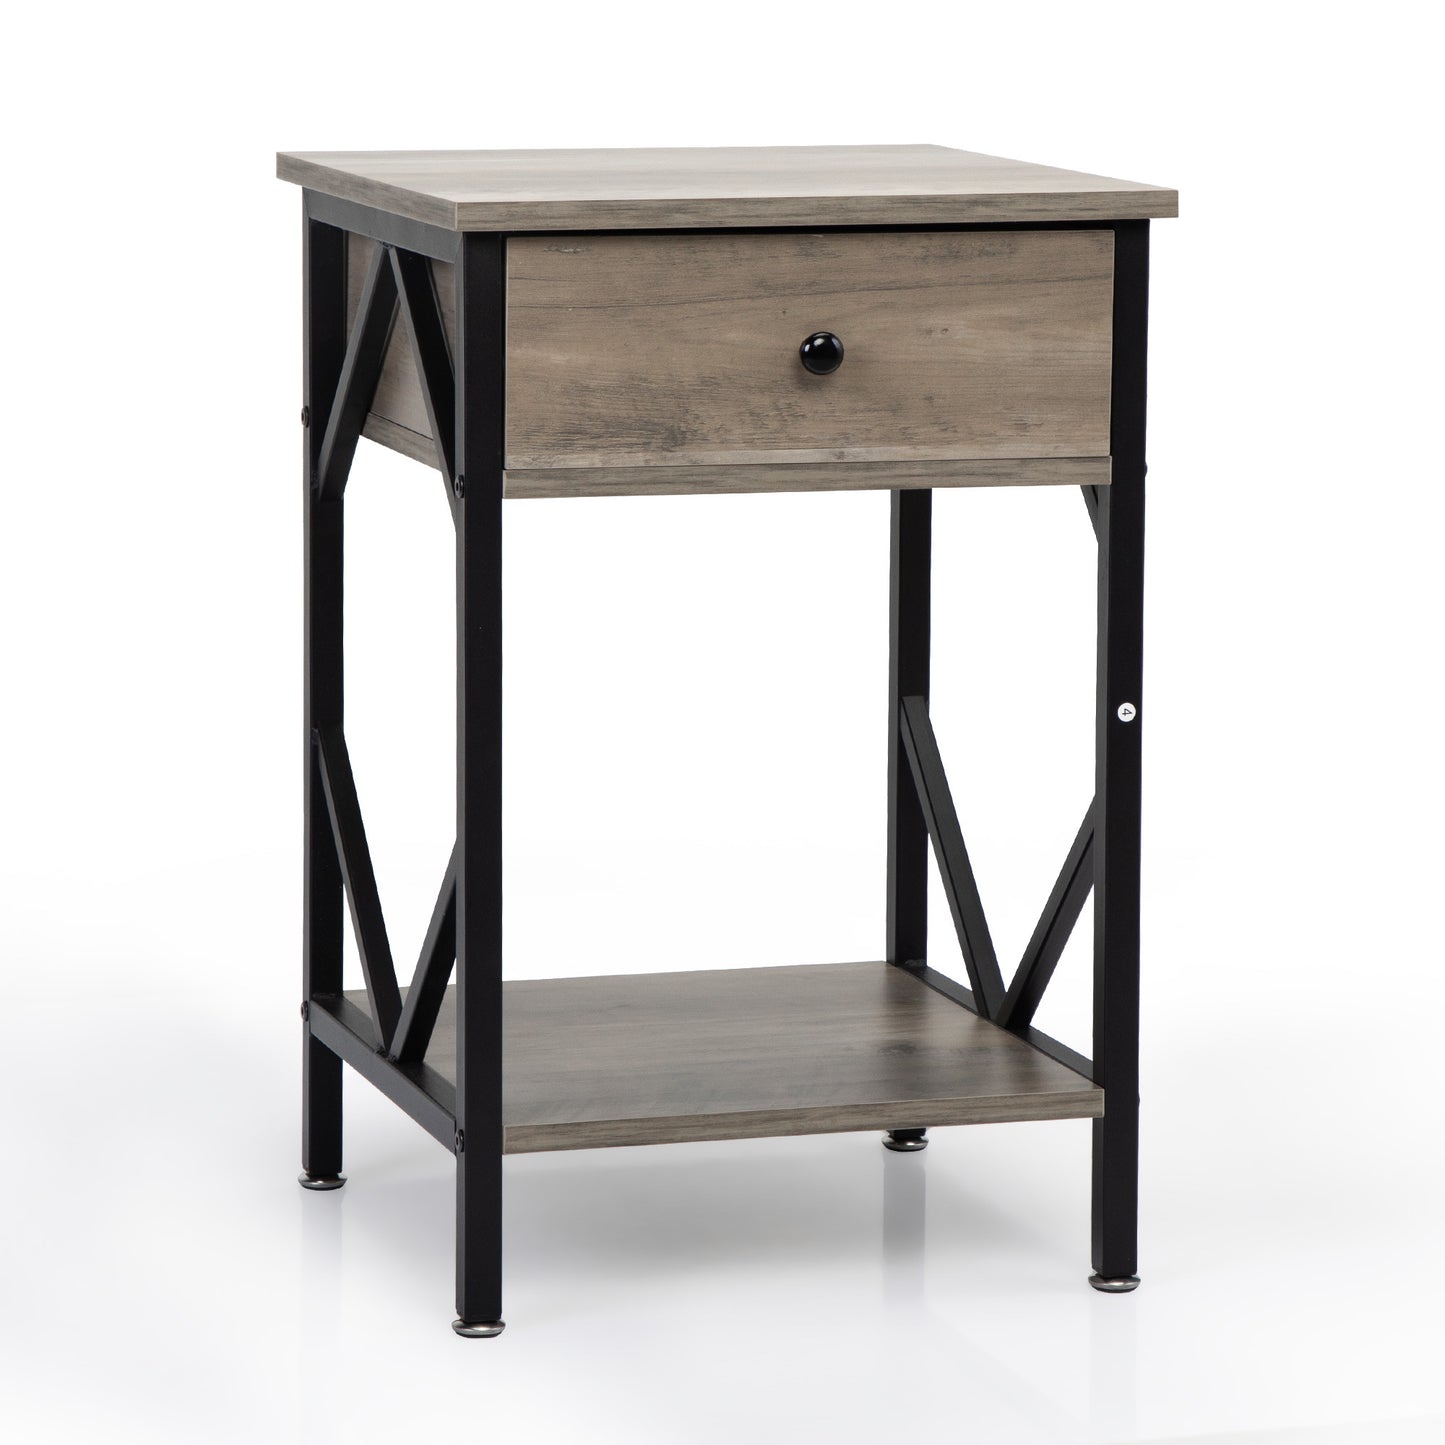 Set of 2 Nightstand Industrial End Tables,